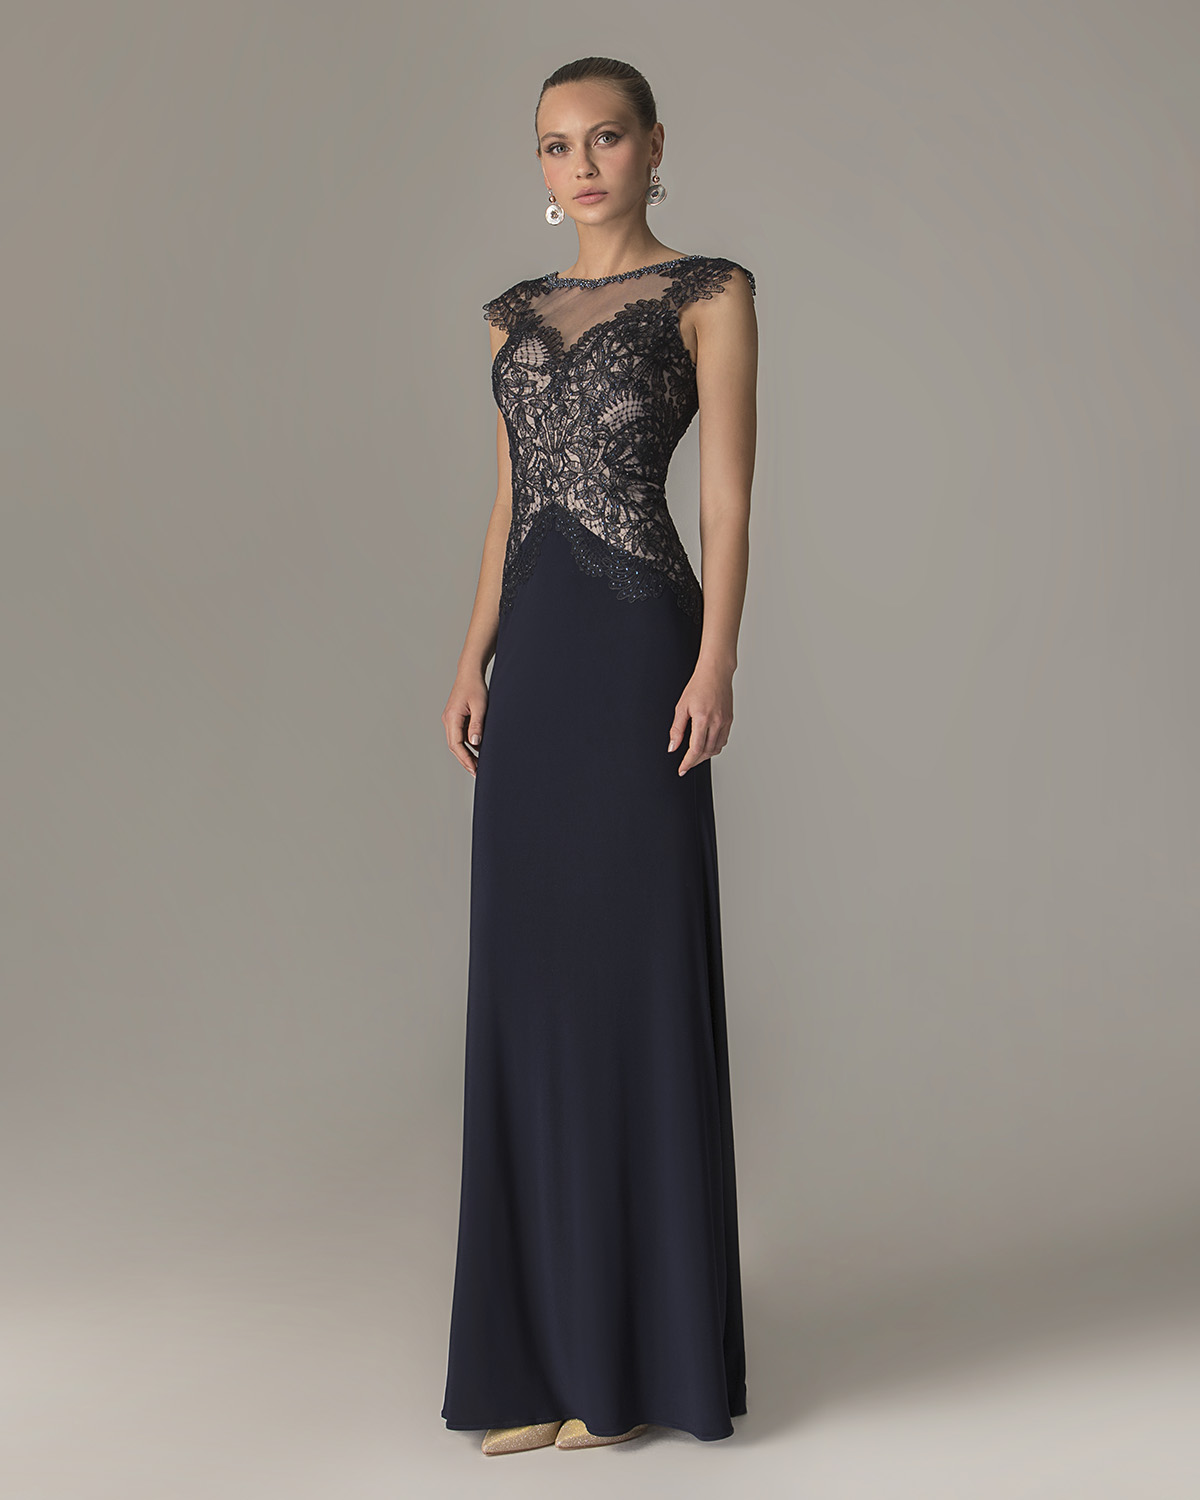 Классические платья / Long dress with a lace top for the mother of the bride